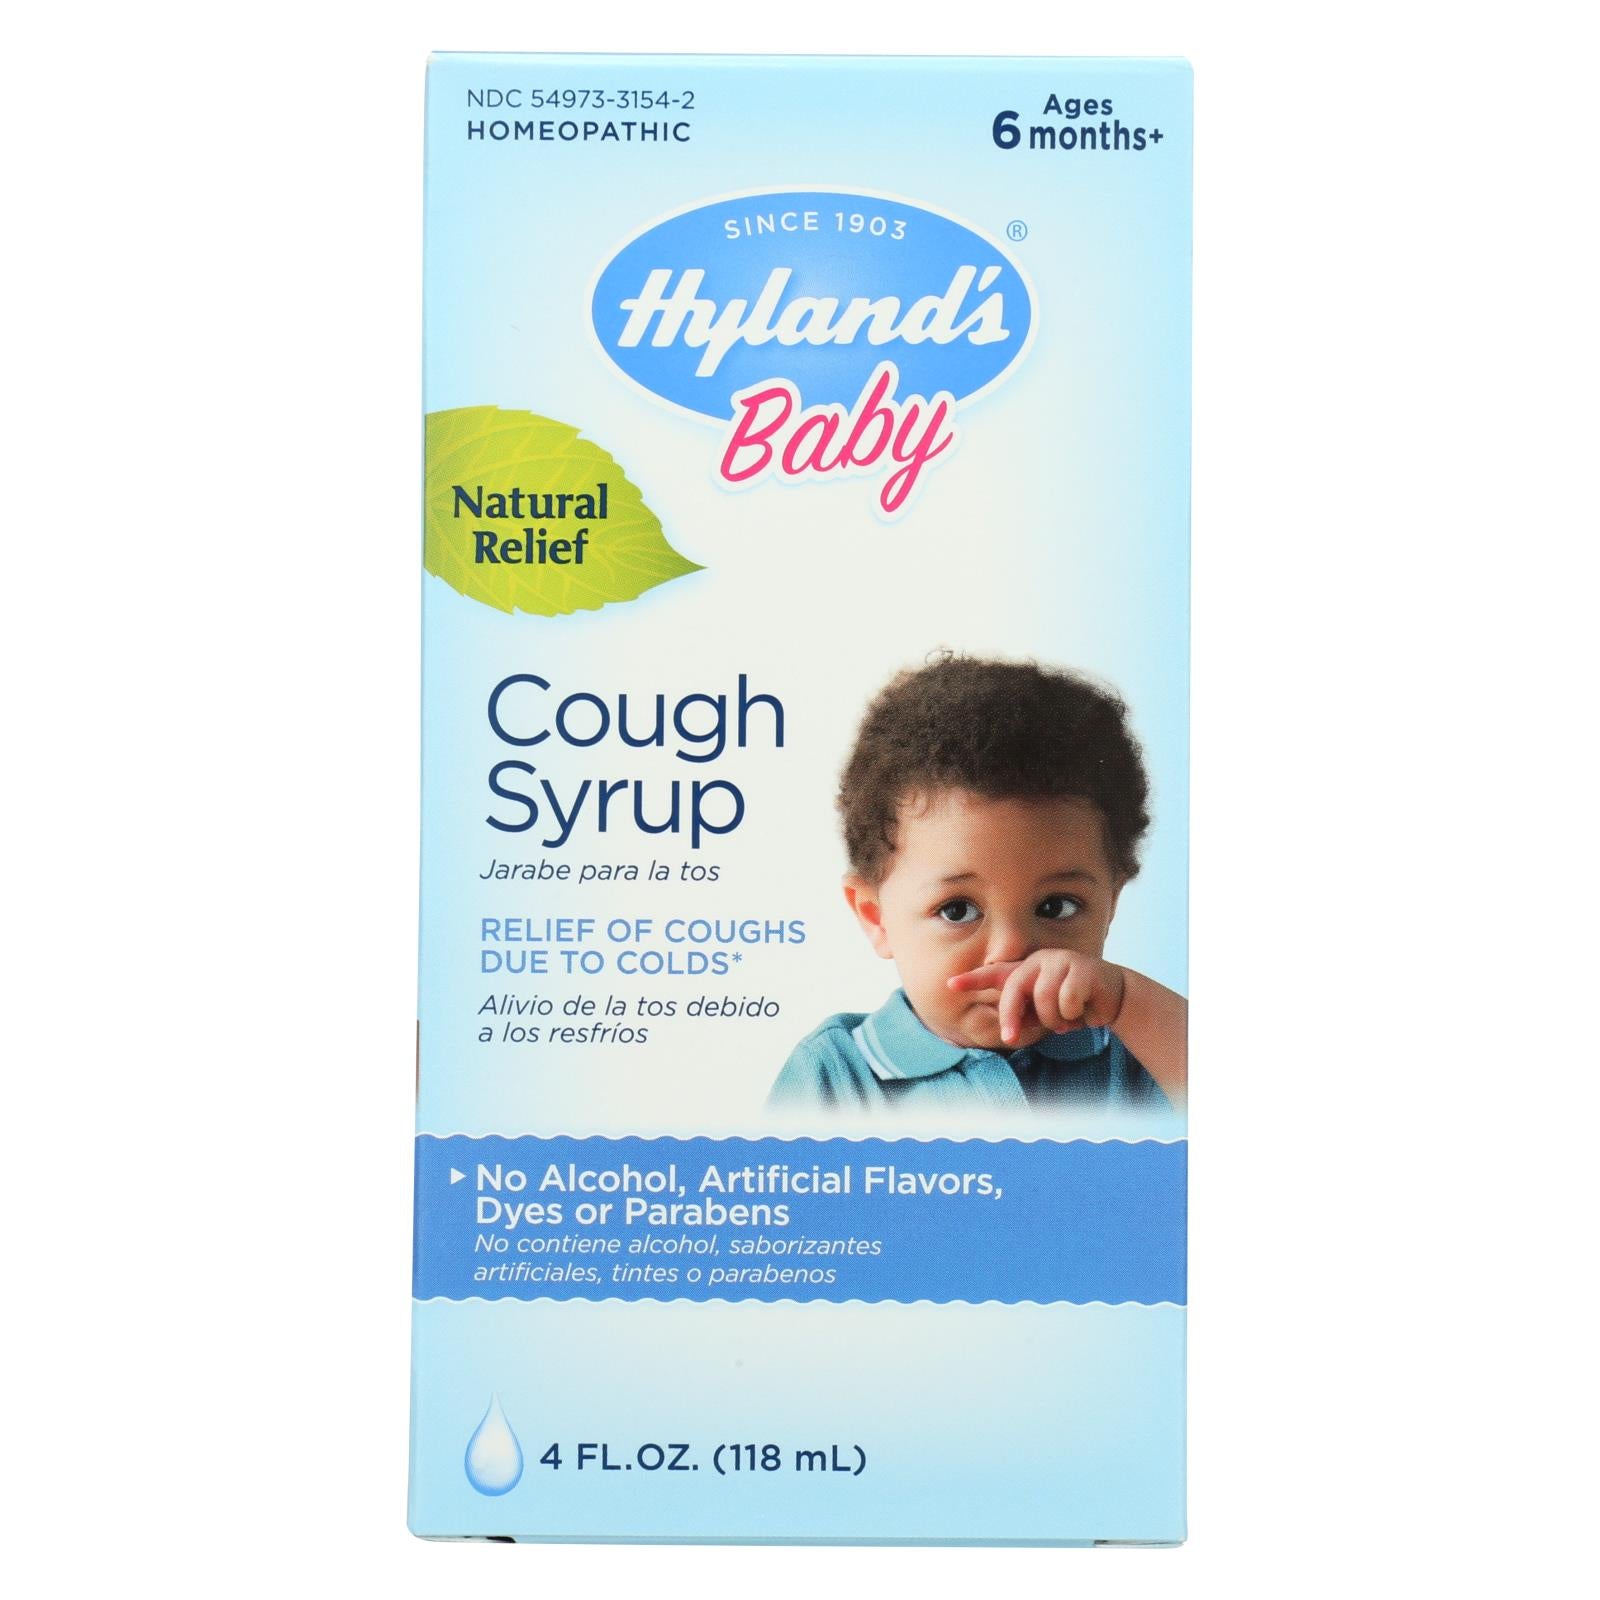 Hyland's Homeopathic Baby Cough Syrup - 4 Oz